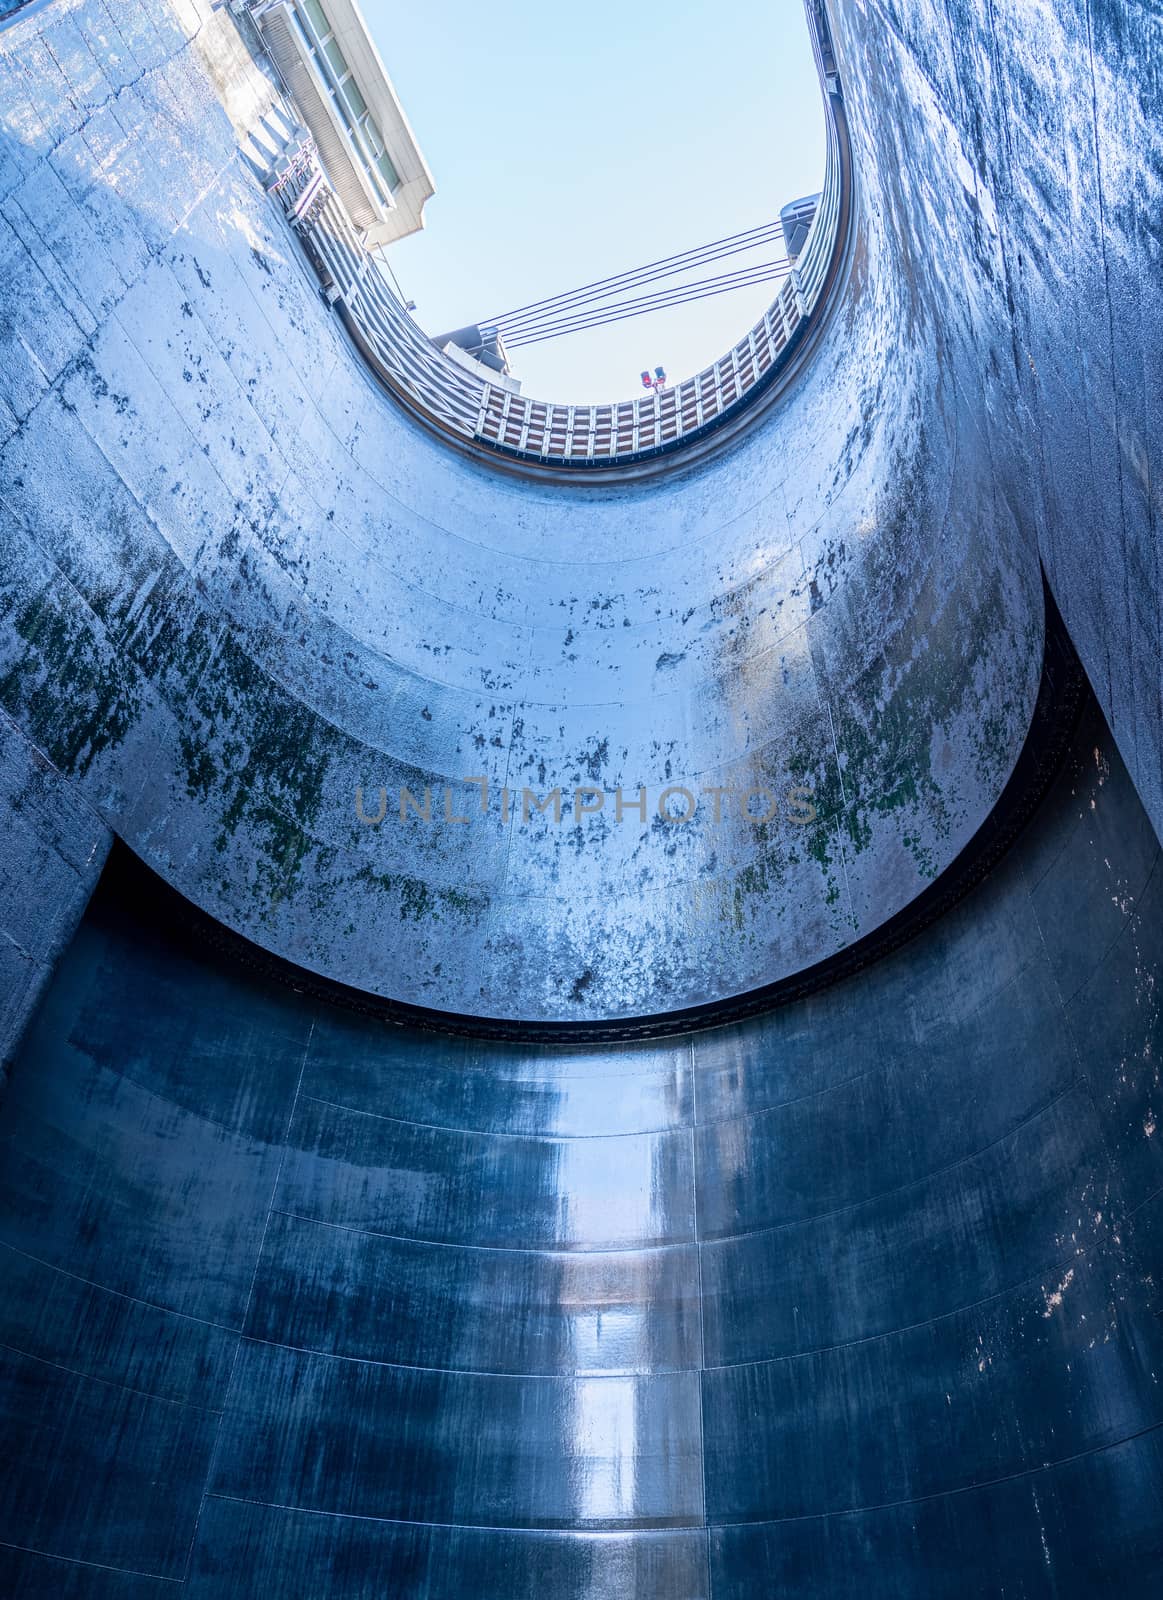 View upwards inside the very deep lock of the Barrapatelo dam on River Douro in Portugal by steheap